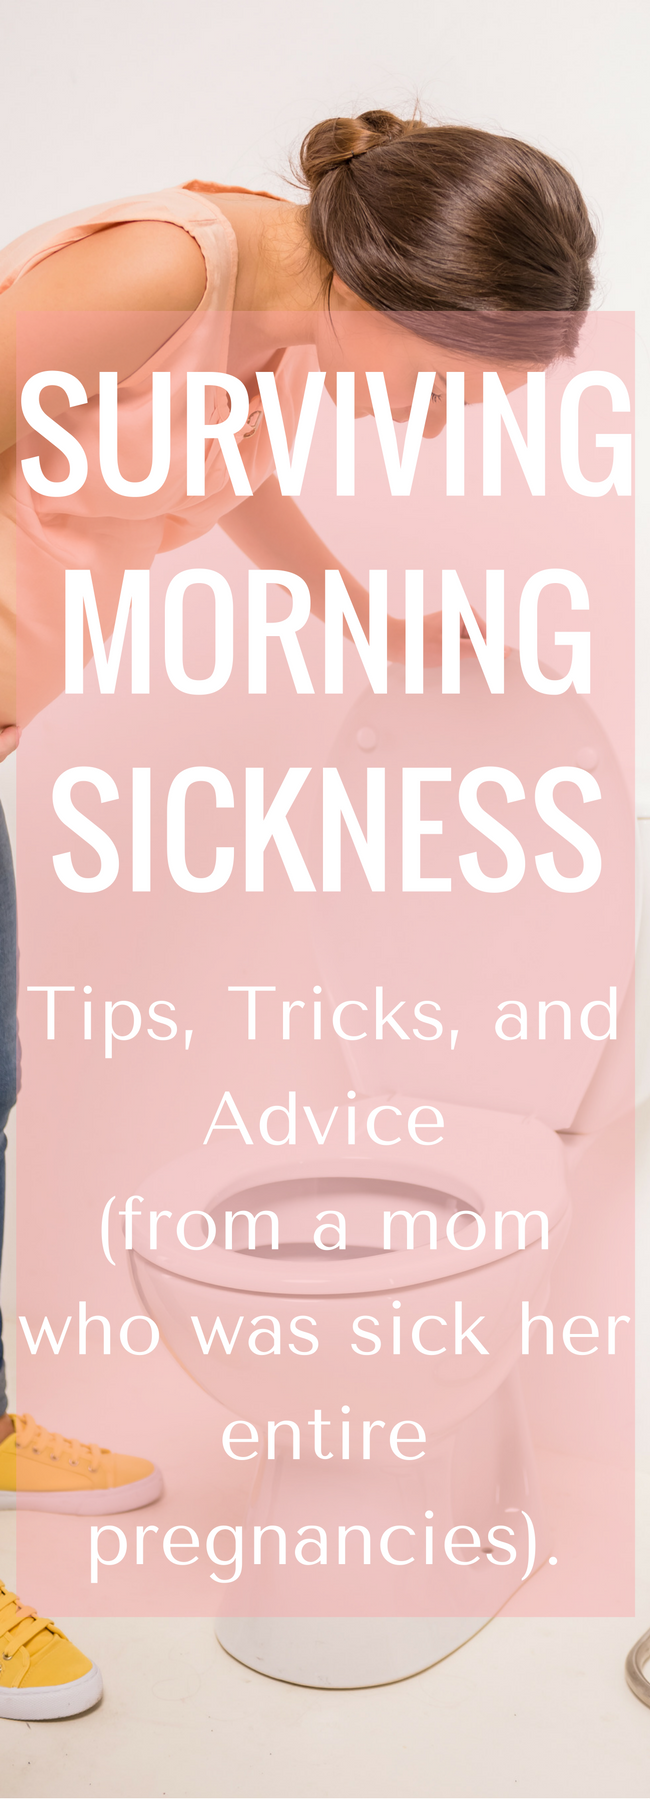 Looking for morning sickness remedies that actually work? Just hoping to find some relief for your pregnancy? Whether you are sick for just the first trimester or the entire pregnancy, this post has everything you need to know about surviving morning sickness.